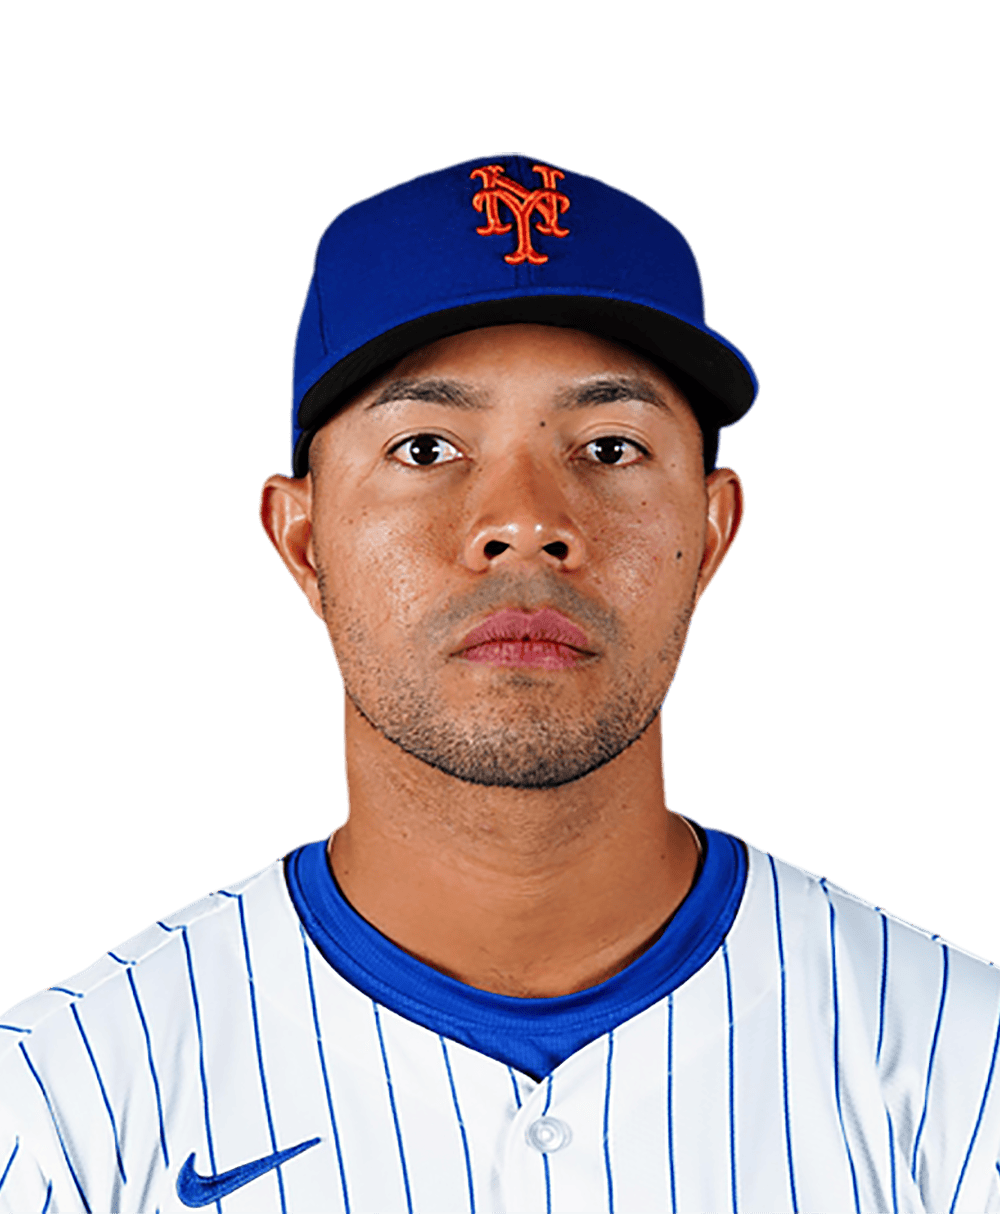 Jose Quintana of the New York Mets pitches against the St. Louis